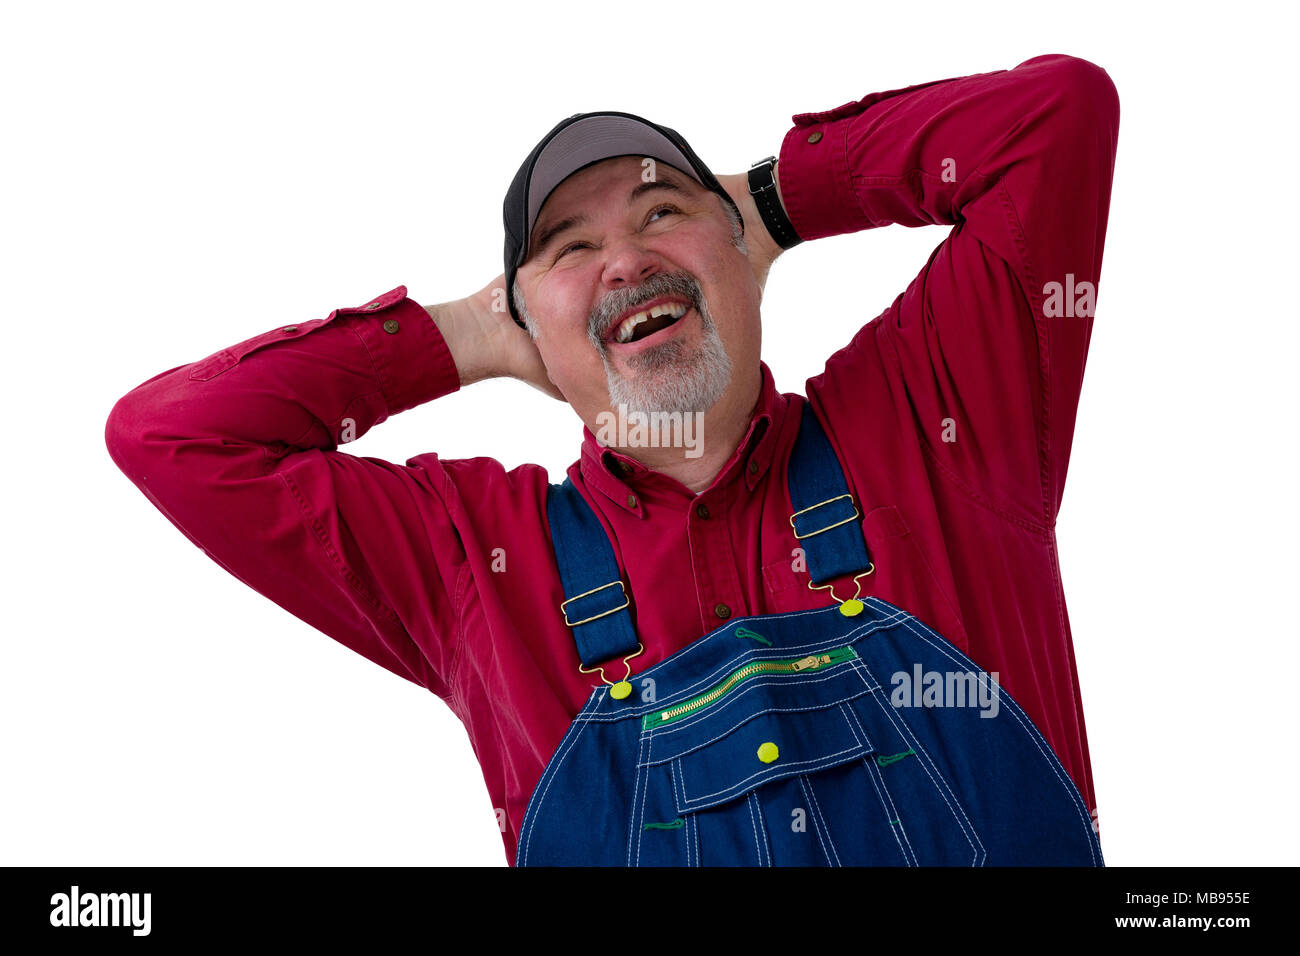 Joyful farmer or worker in bib overalls laughing in delight as he looks up with hands clasped behind his head on white Stock Photo